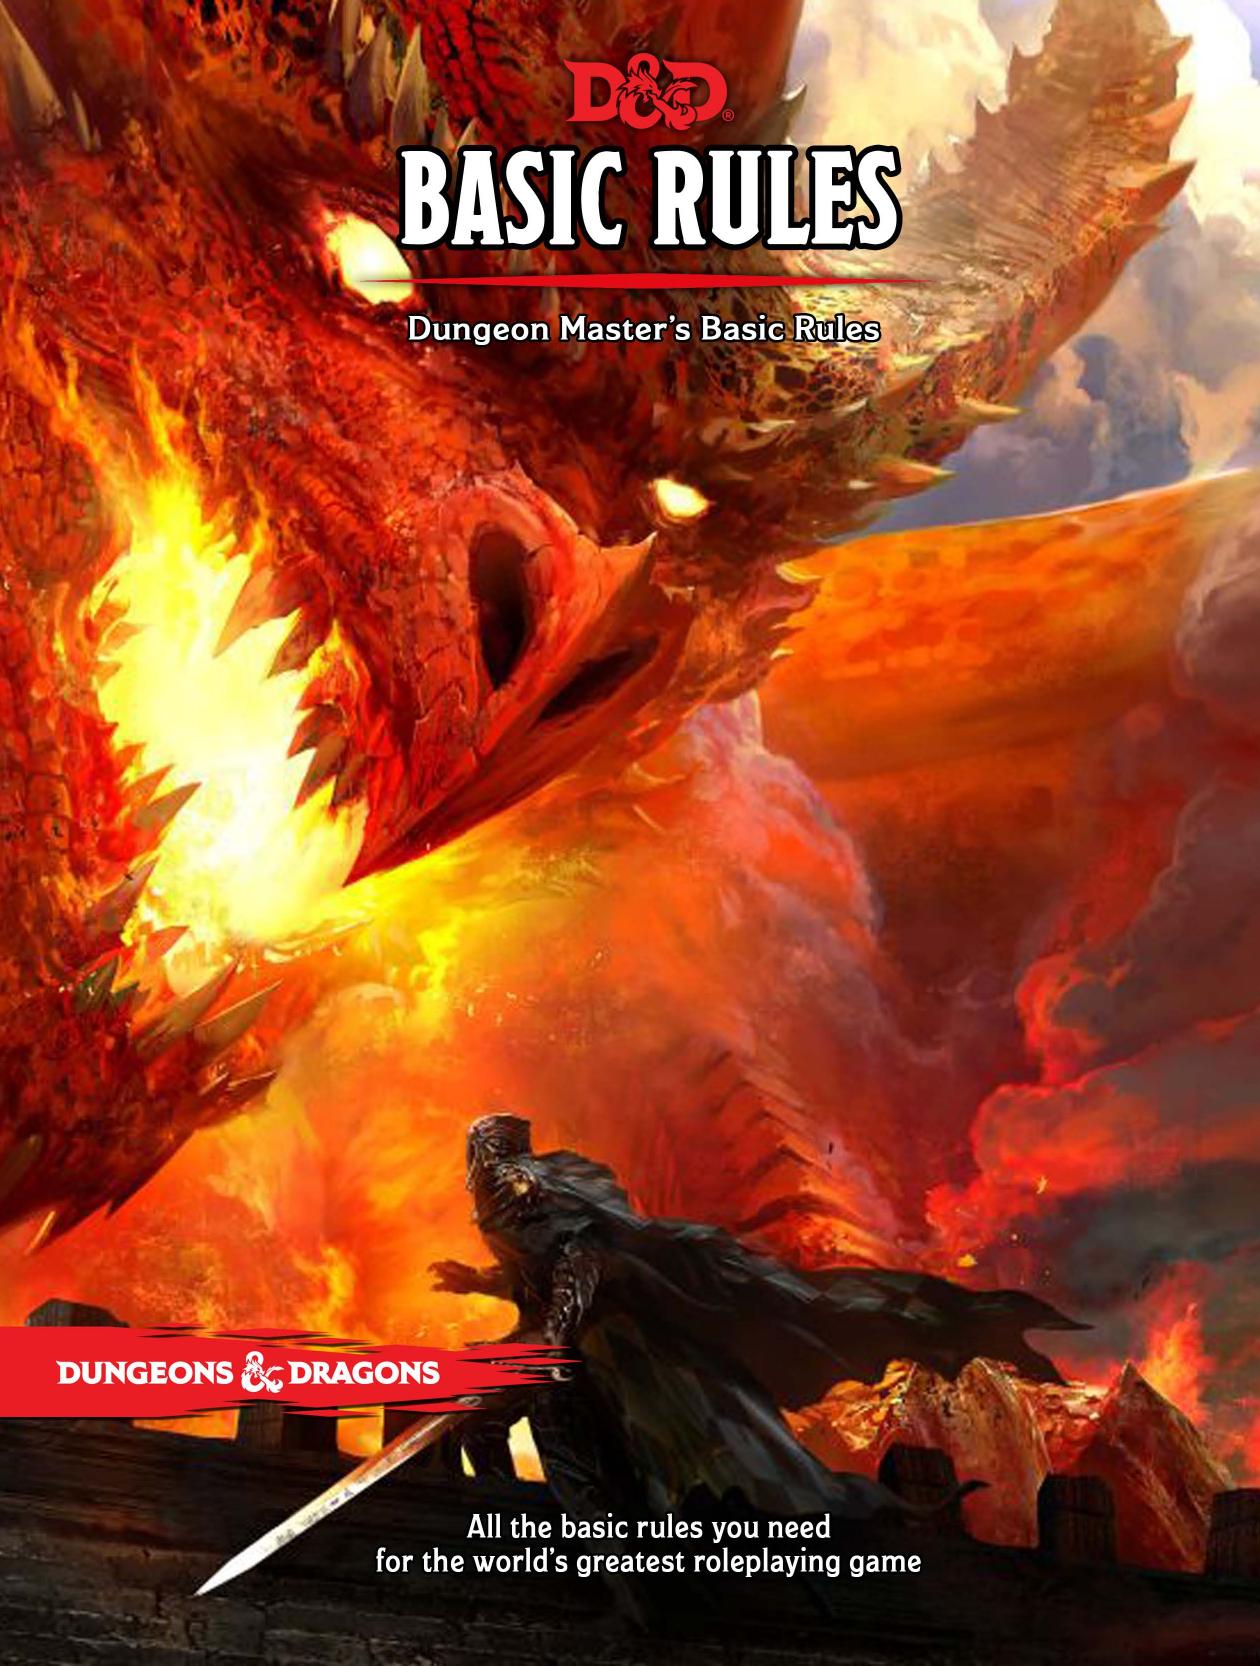 Dungeon Master's Basic Rules Version 0.5